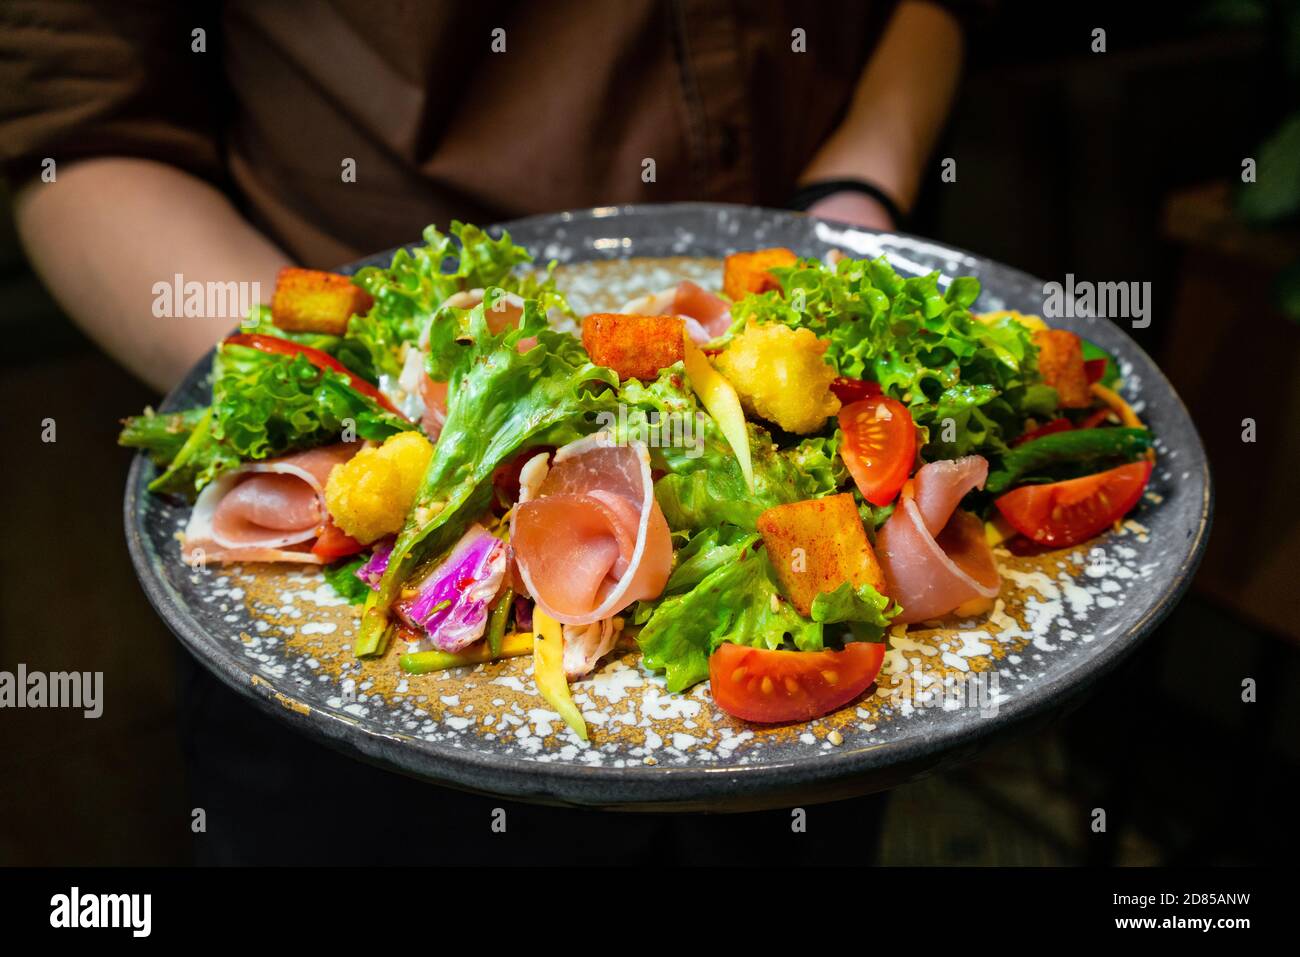 Female hands holding hydroponic vegetable bacon salad with wooden table background. Stock Photo